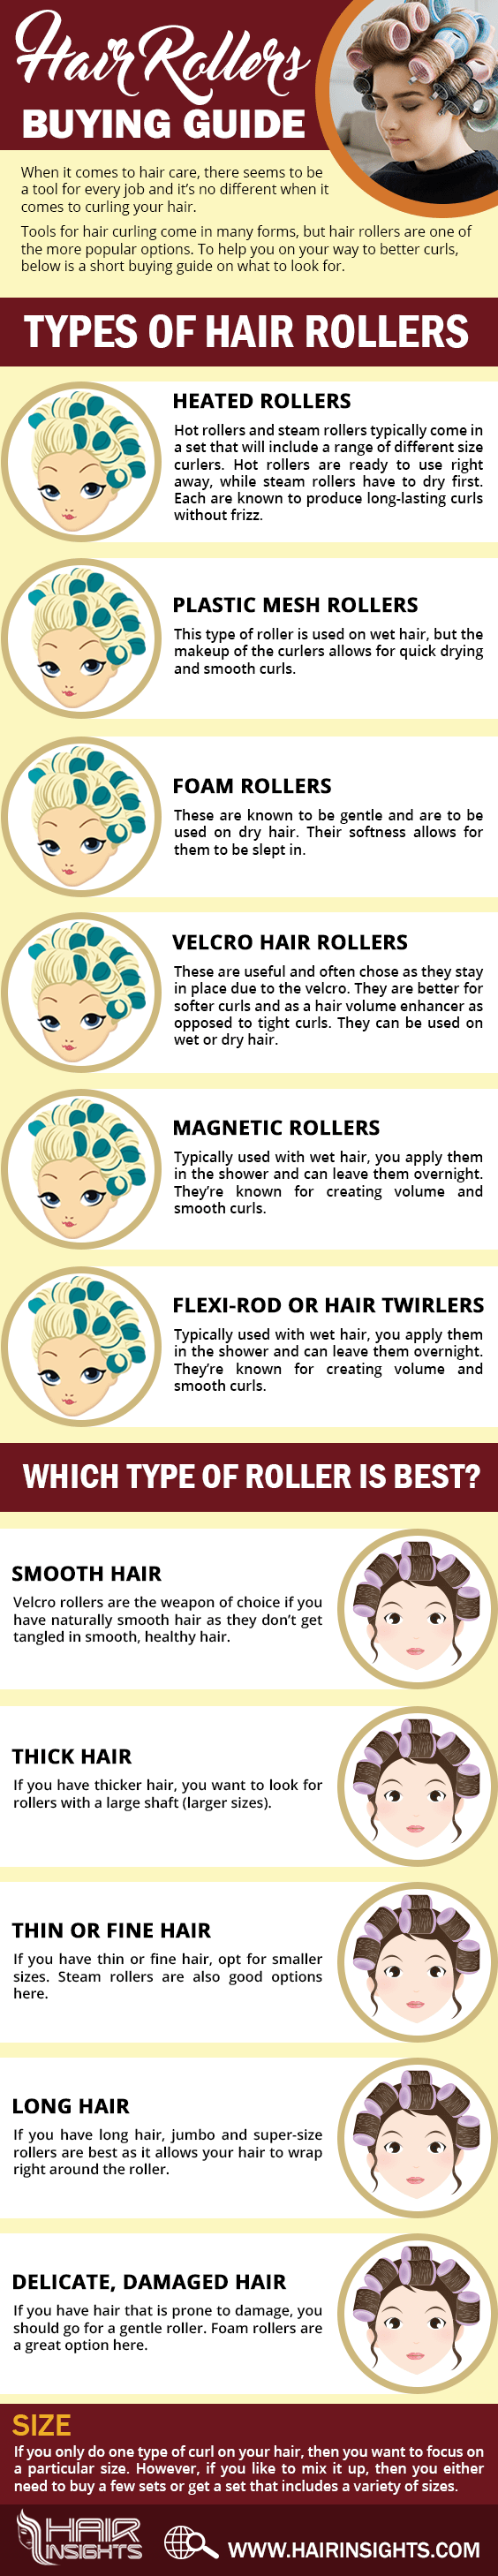 The Perfect Hair Roller For You - Infographic